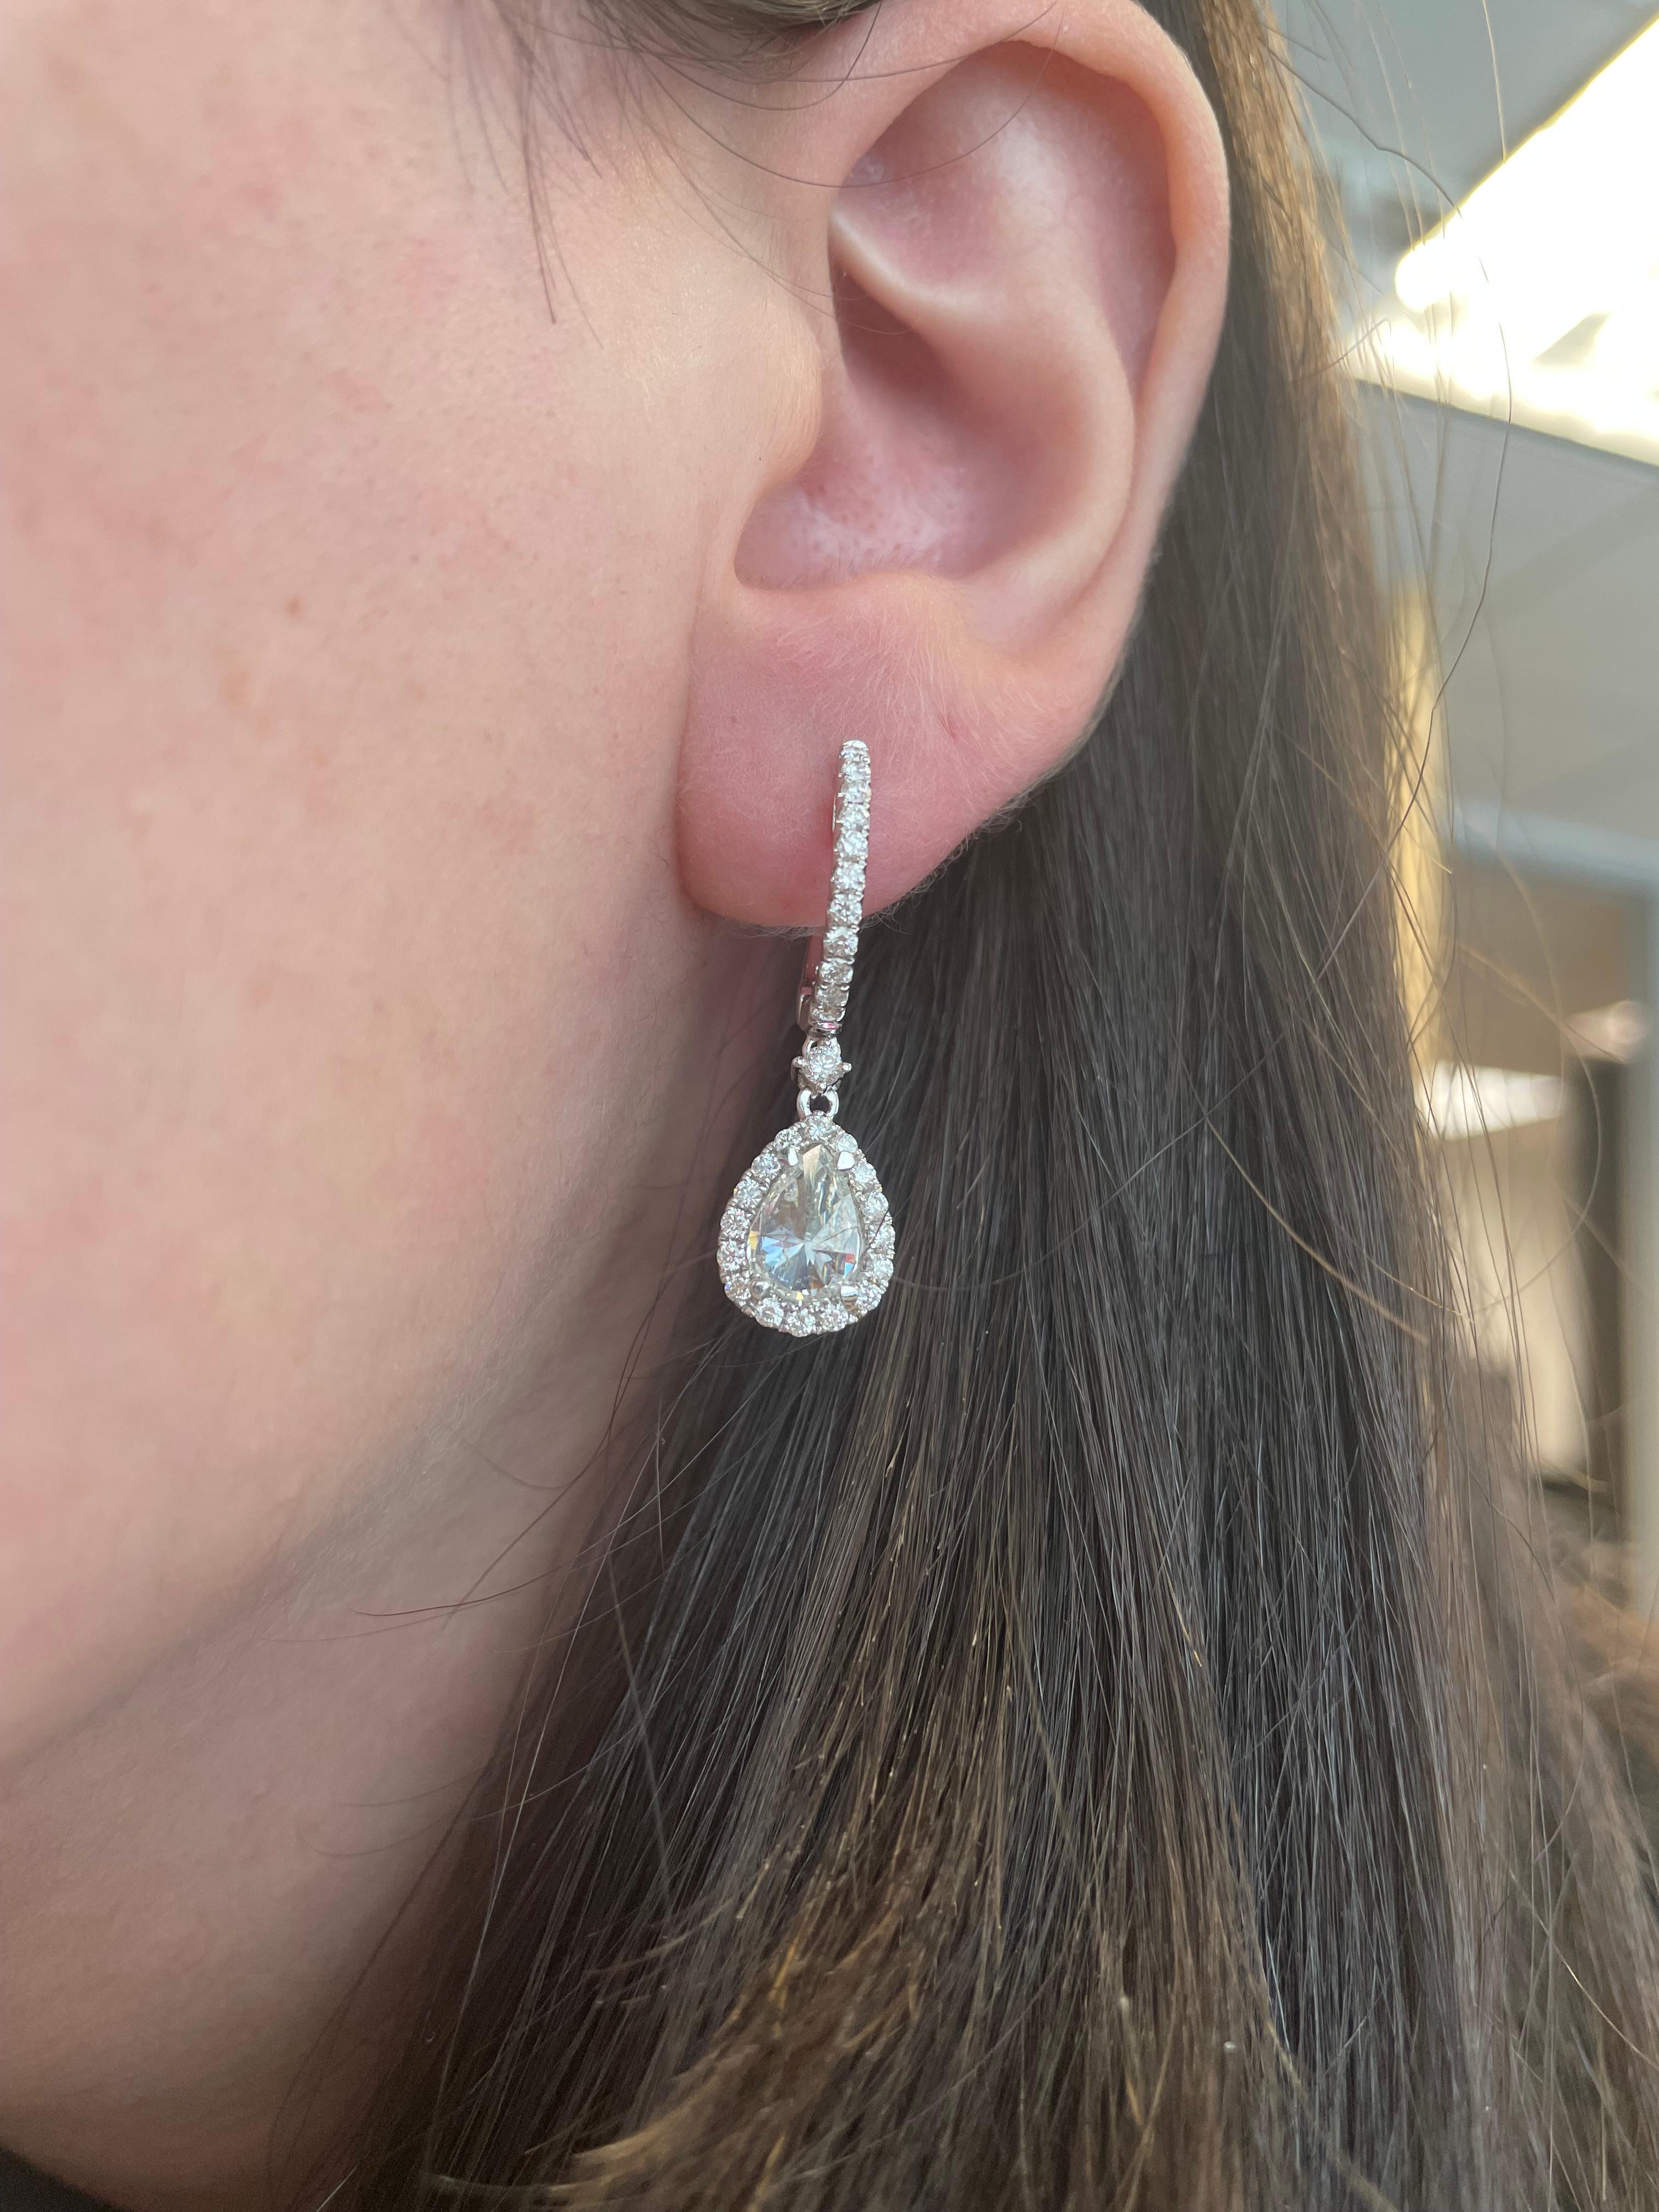 Unique old mind cut upside down diamond drop earrings.
2 pear shape old mine cut diamonds, 1.83 carats. Approximately G/H color and SI clarity. Complimented by 56 round brilliant diamonds, 0.85 carats. Approximately G/H color and SI clarity. 18k